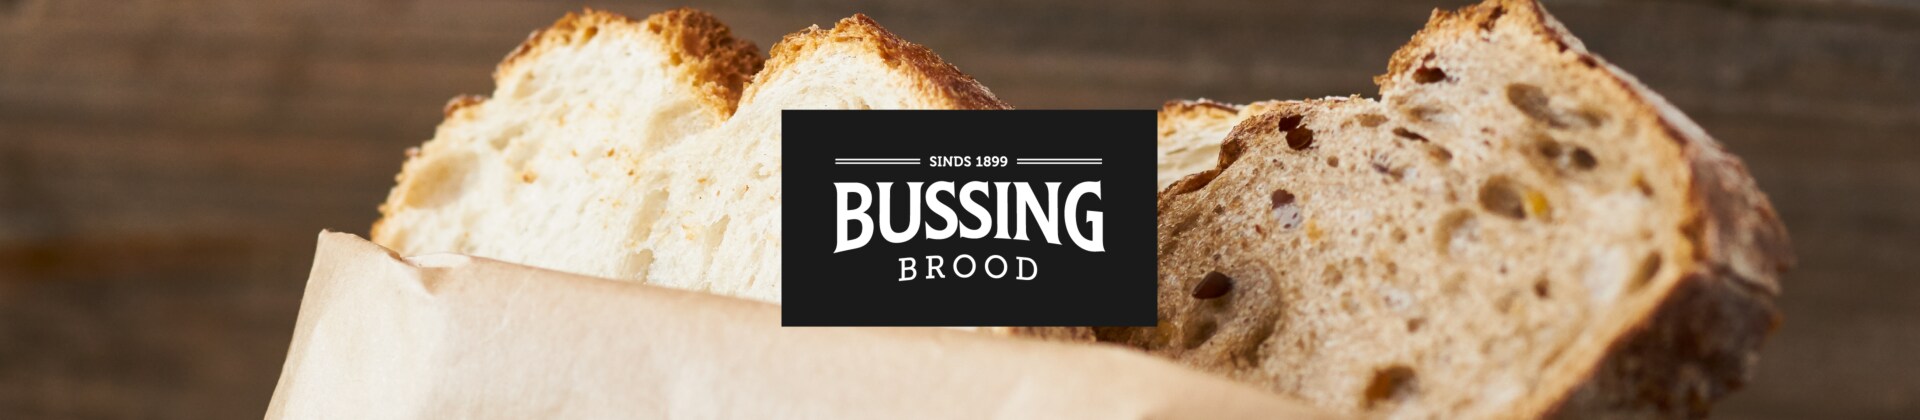 Bussing brood